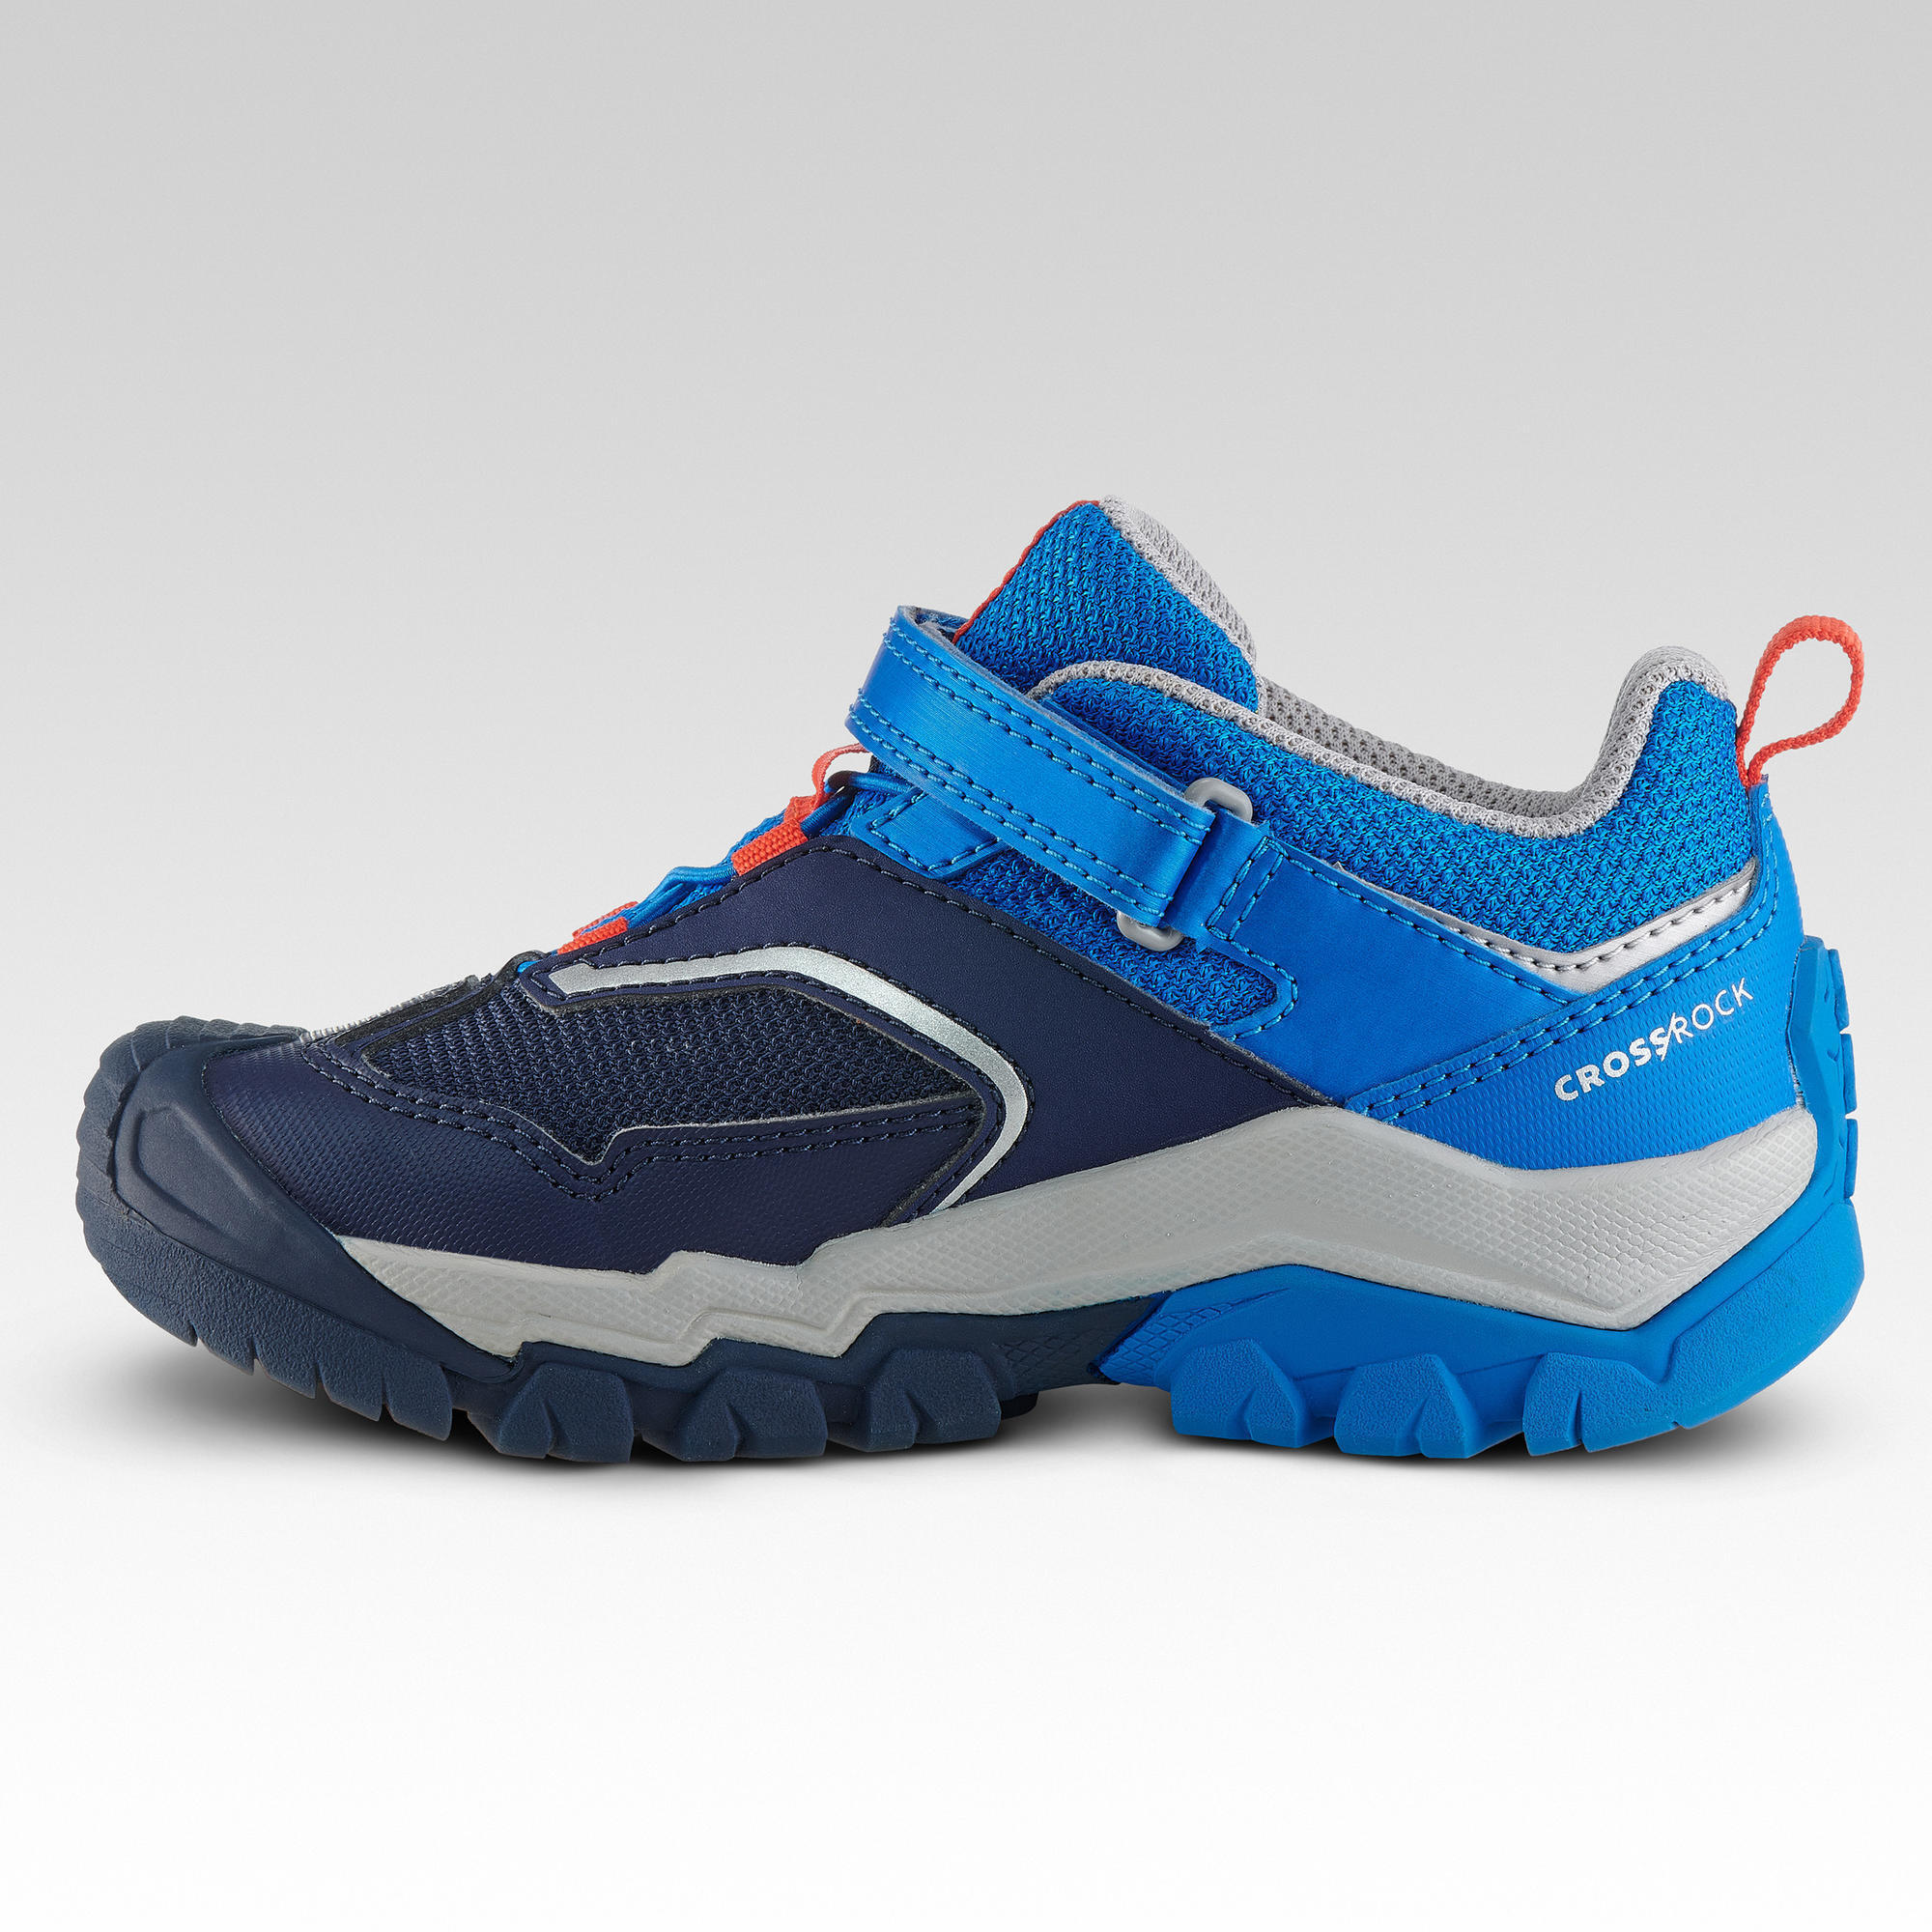 Child's Low Walking Shoes - Navy Blue 2/7